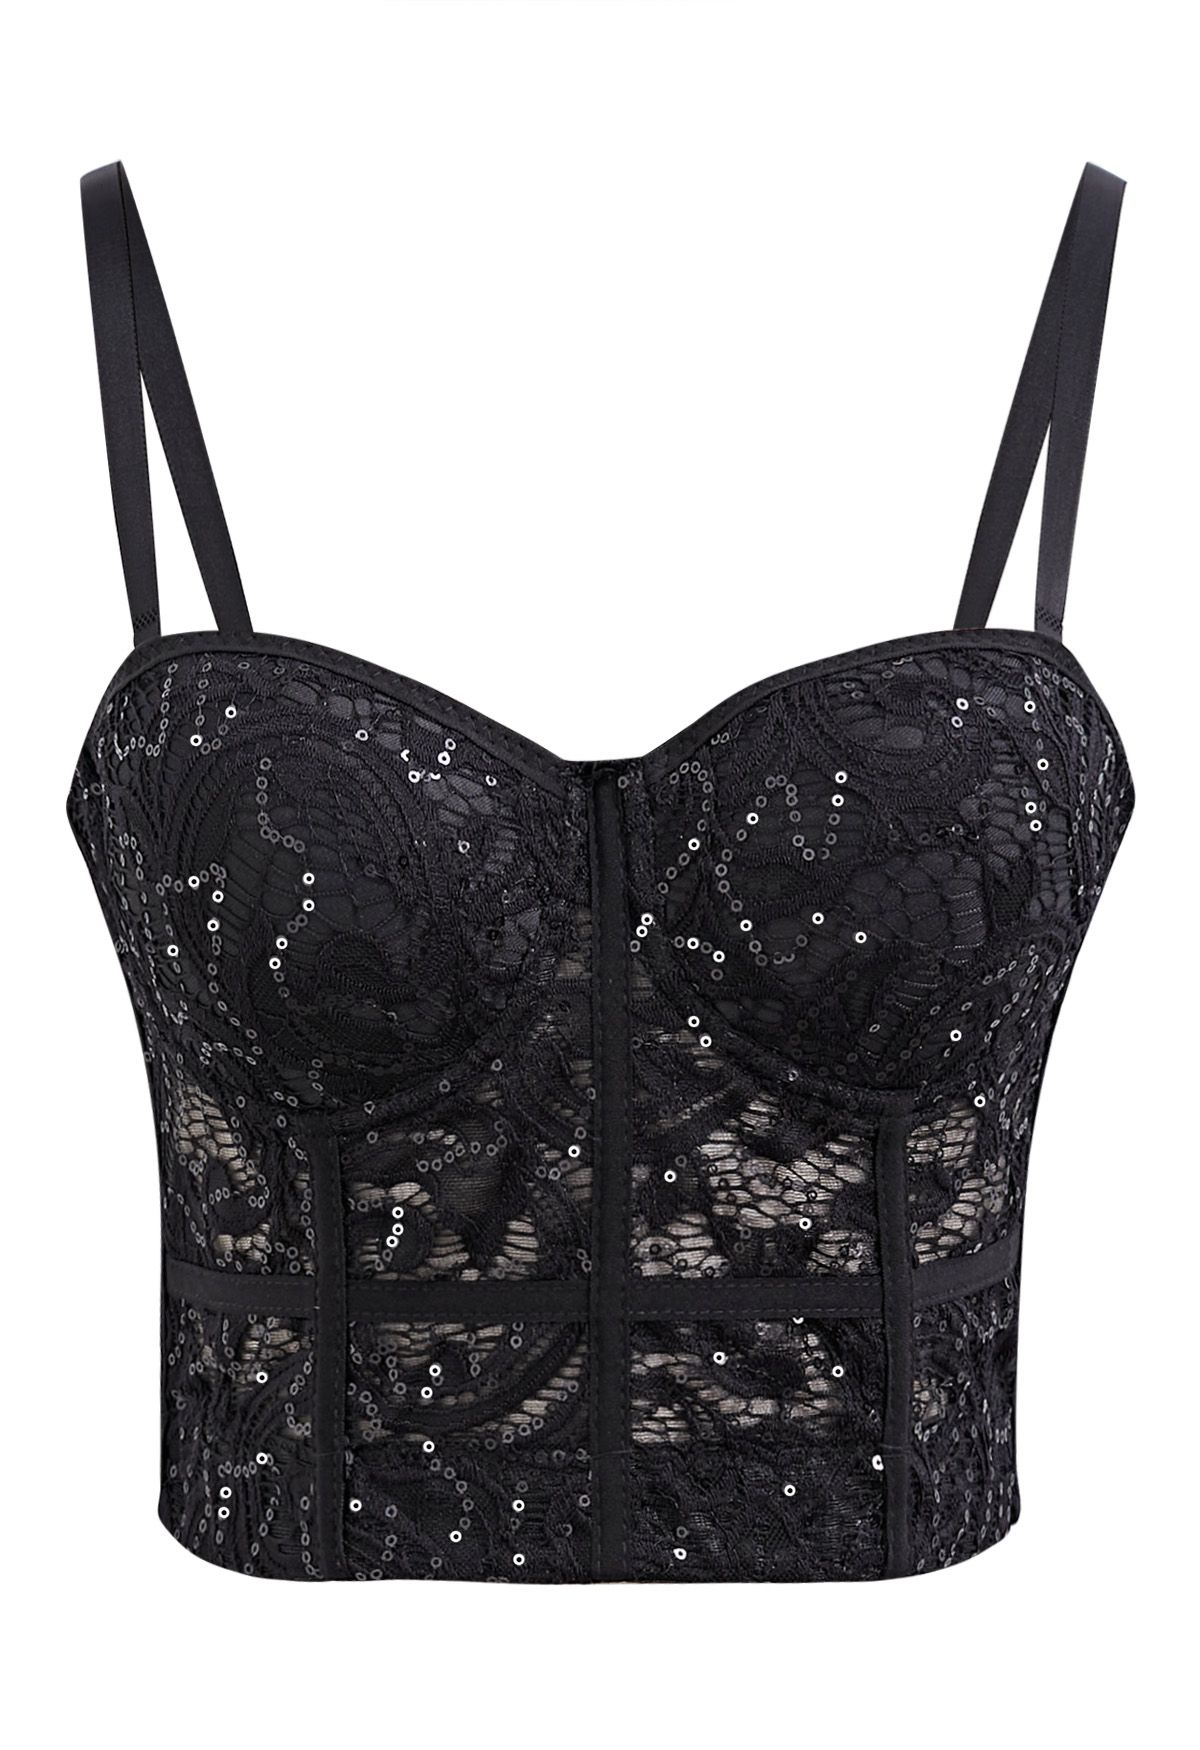 Sequined Lace Bustier Crop Top in Black